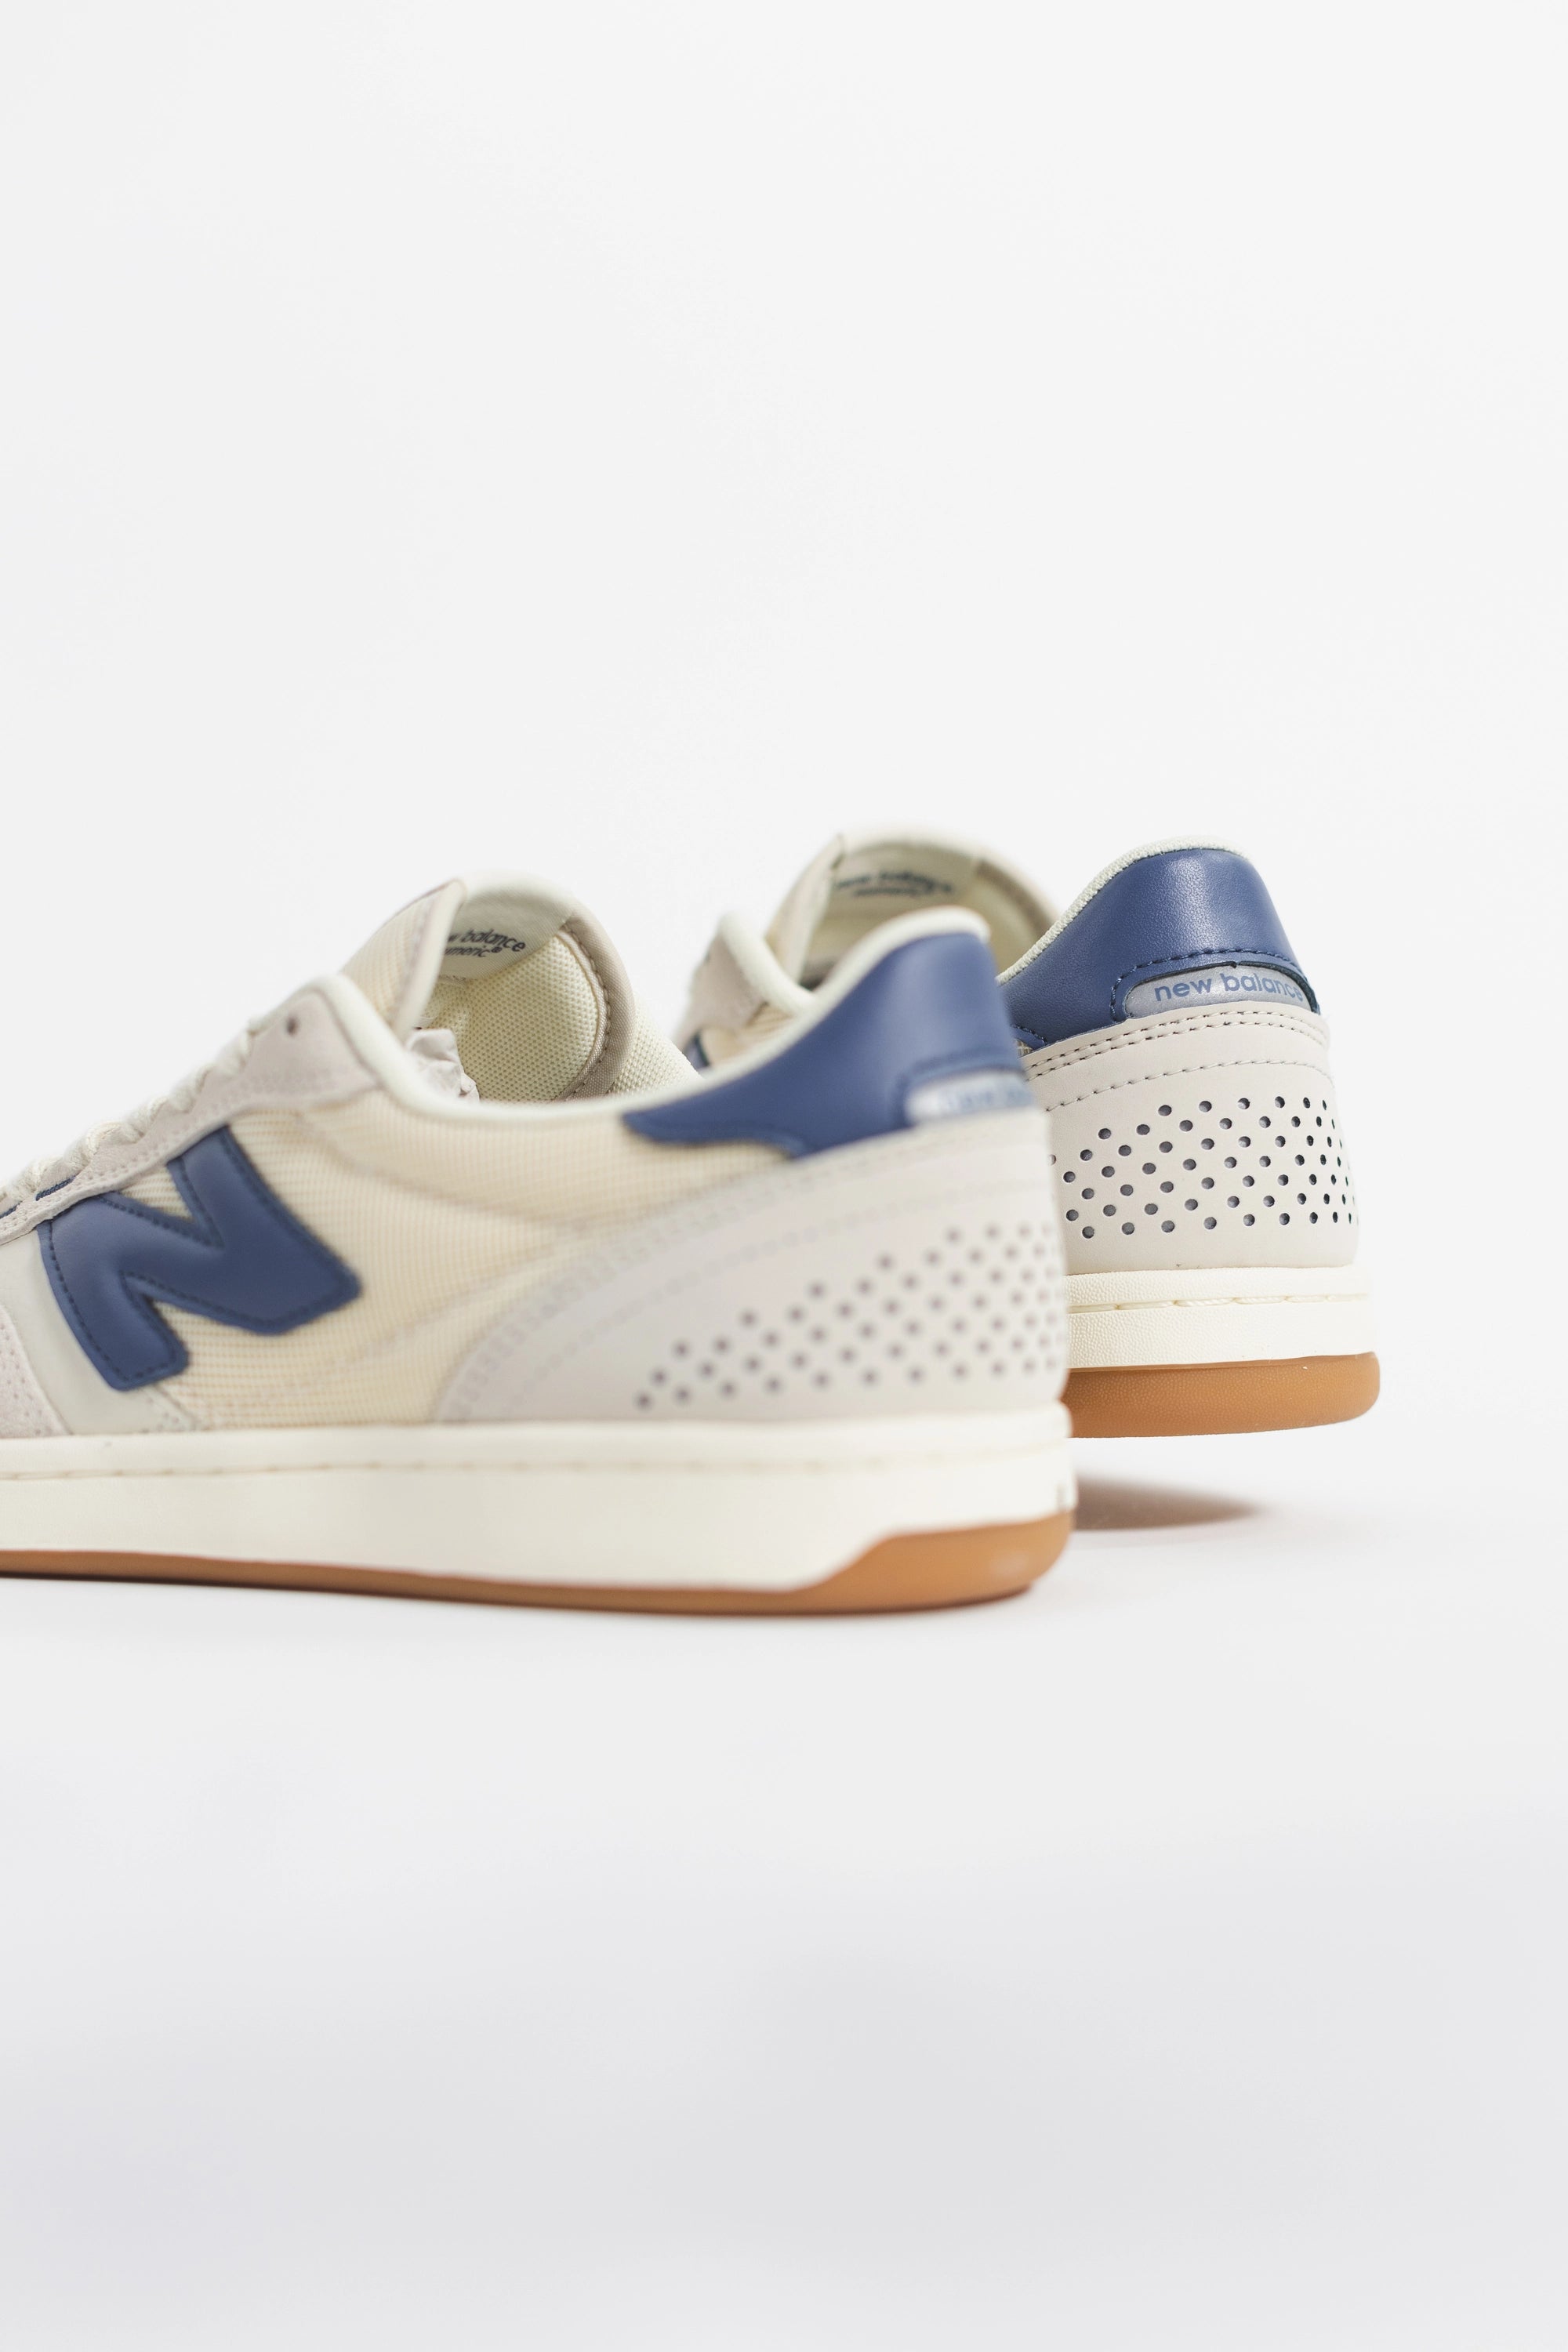 New Balance Numeric 440 V2 in Sea Salt/Vintage Indigo, featuring NDurance technology and a durable, comfortable design.